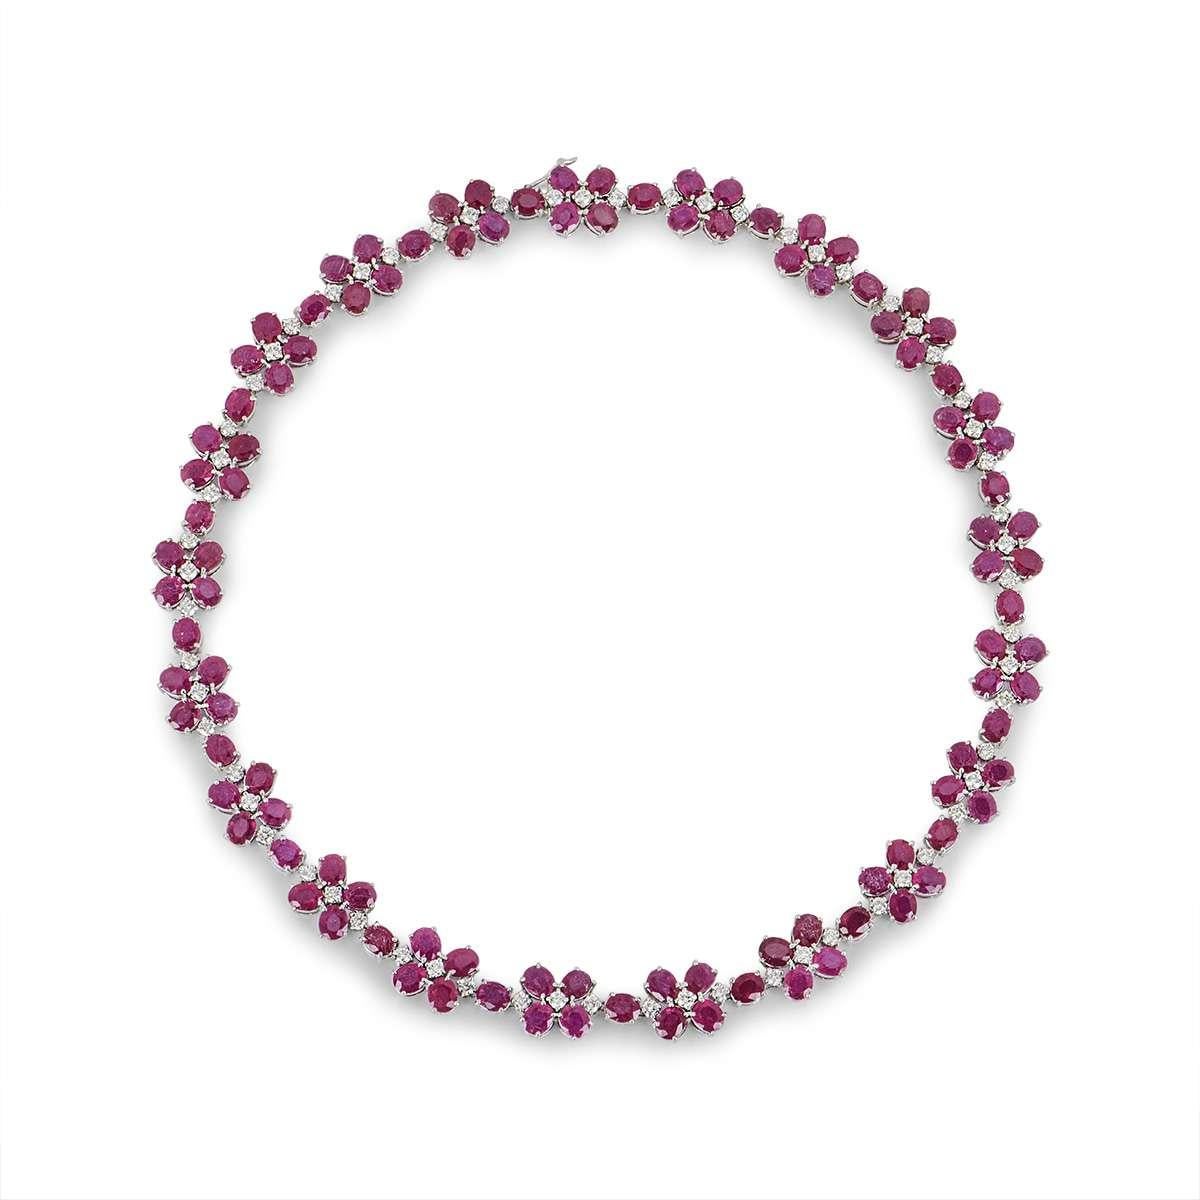 Oval Cut Ruby and Diamond Necklace 76.86 Carat Rubies